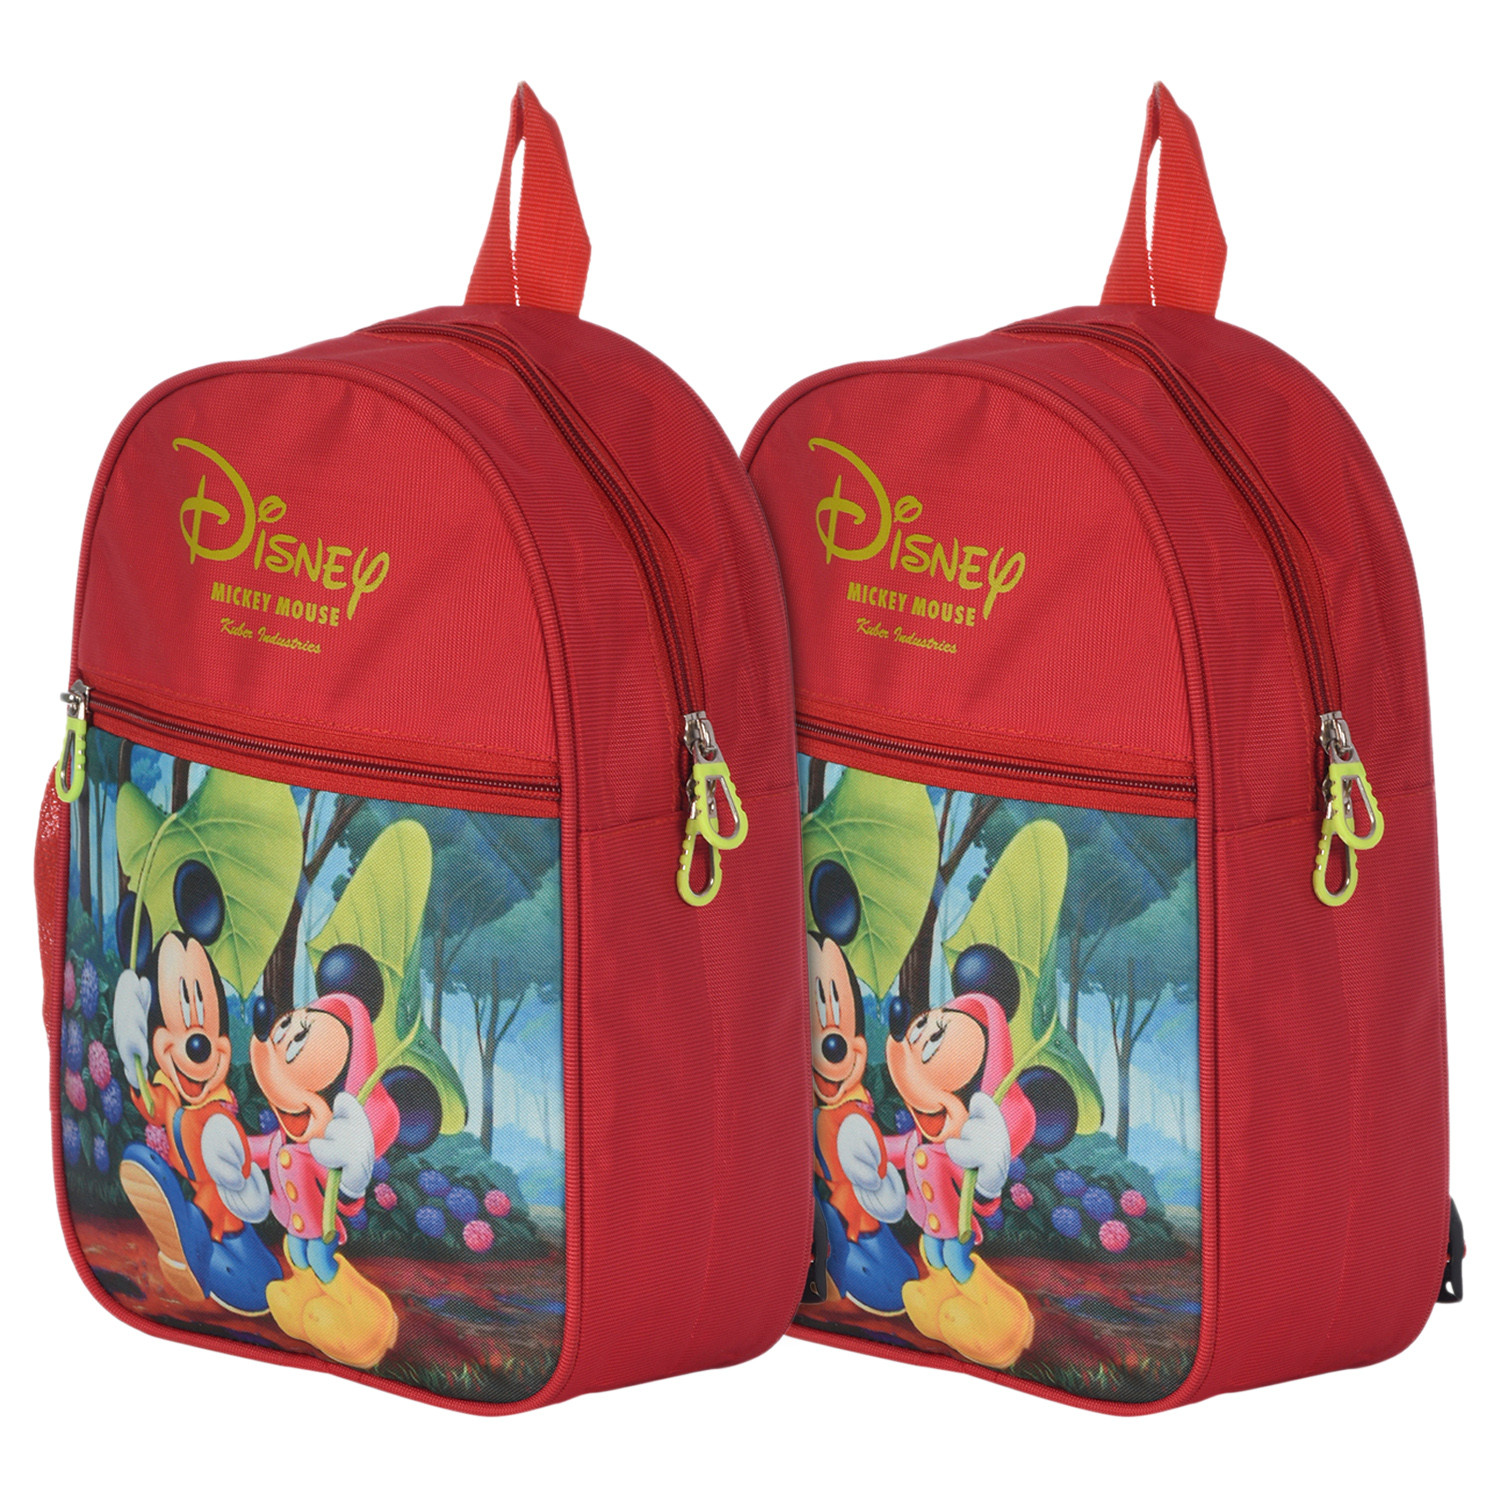 Kuber Industries Mickey & Minnie Print Kids Backpack Bag for School, Travel, Casual, Picnics (Red)